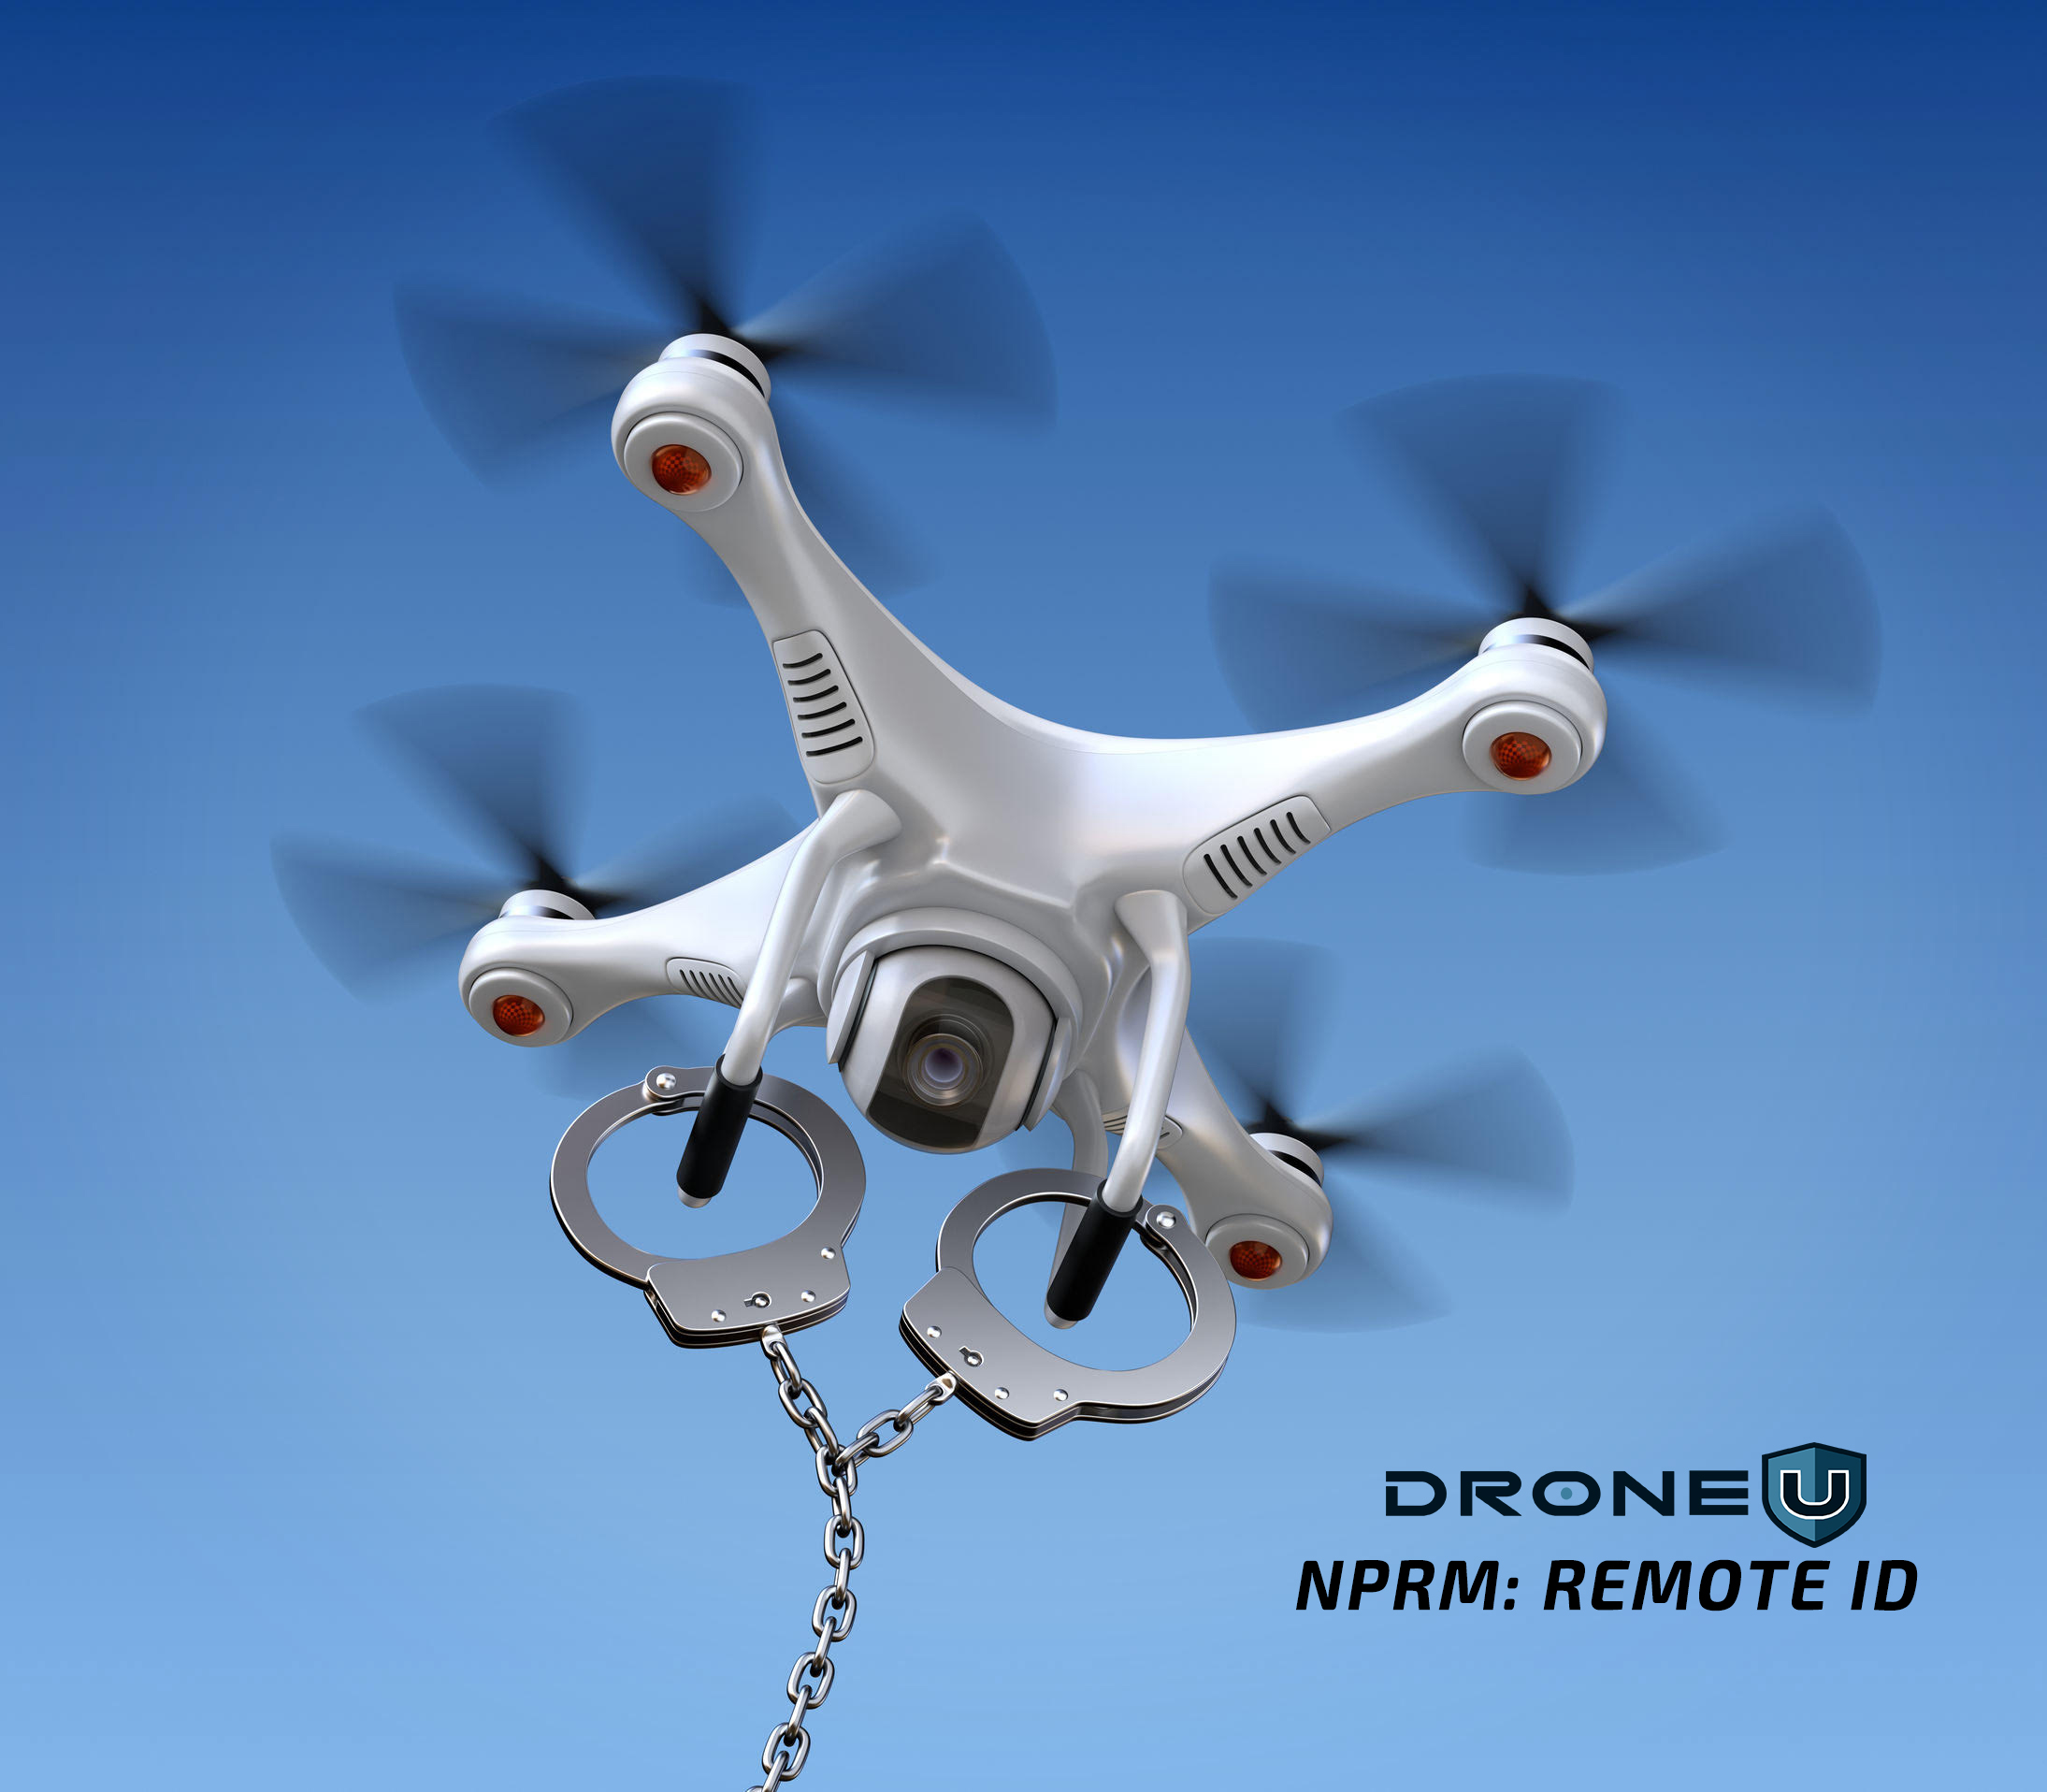 Faa Announces Drone Remote Id Why We Are Disappointed Drone U